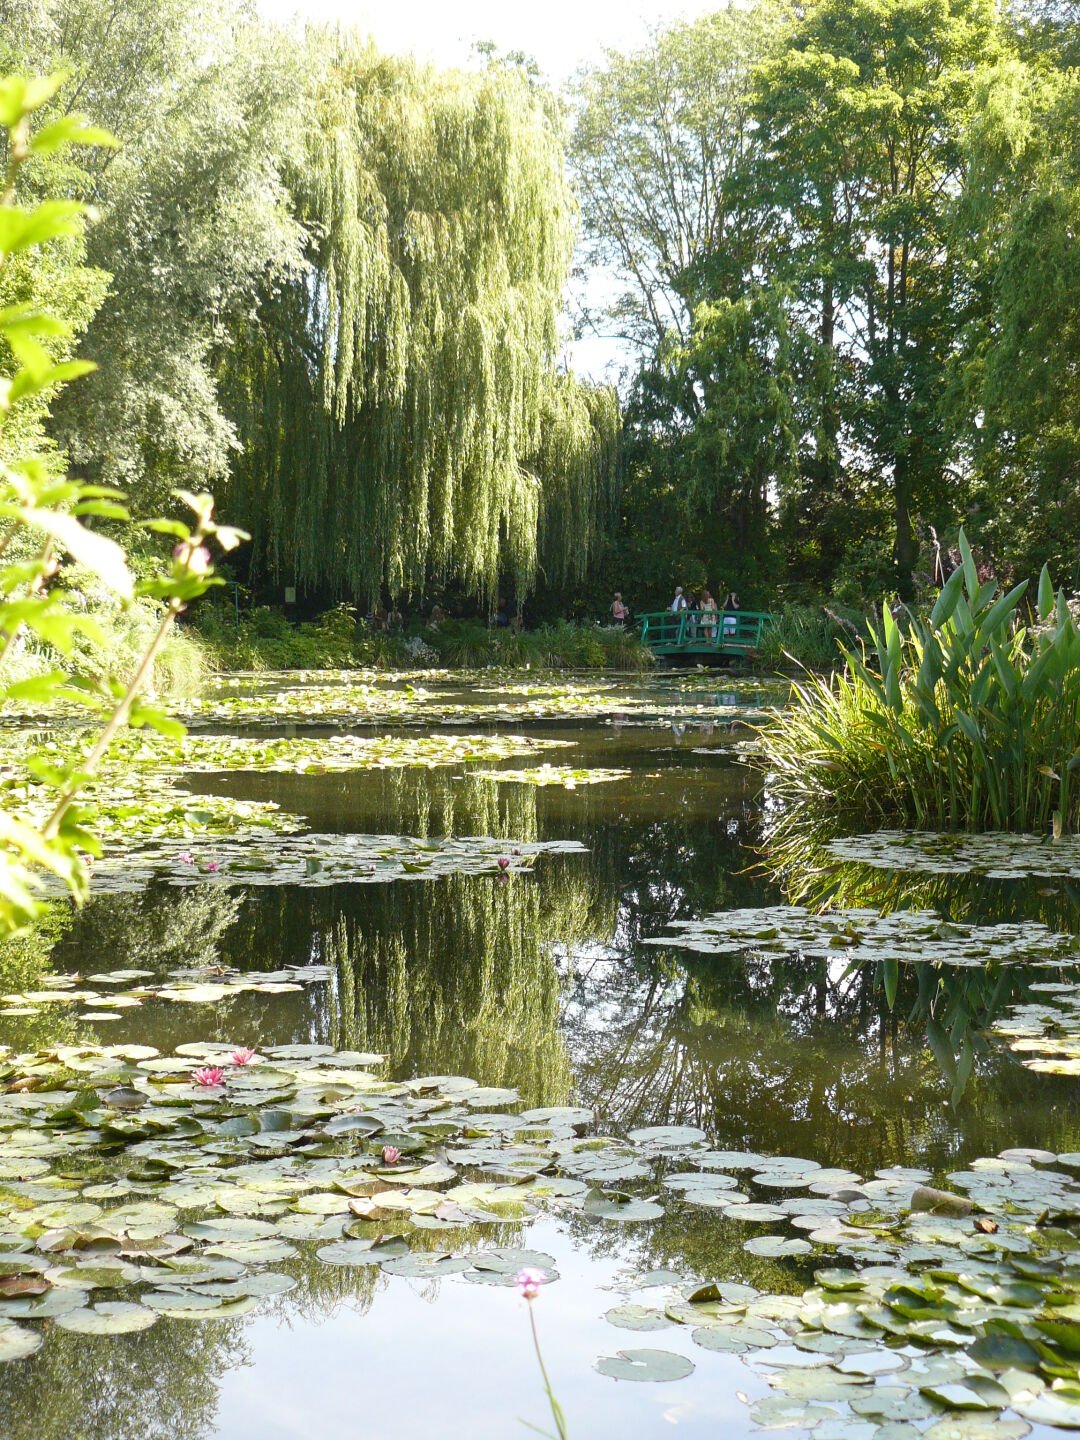 The famous water lily pond,